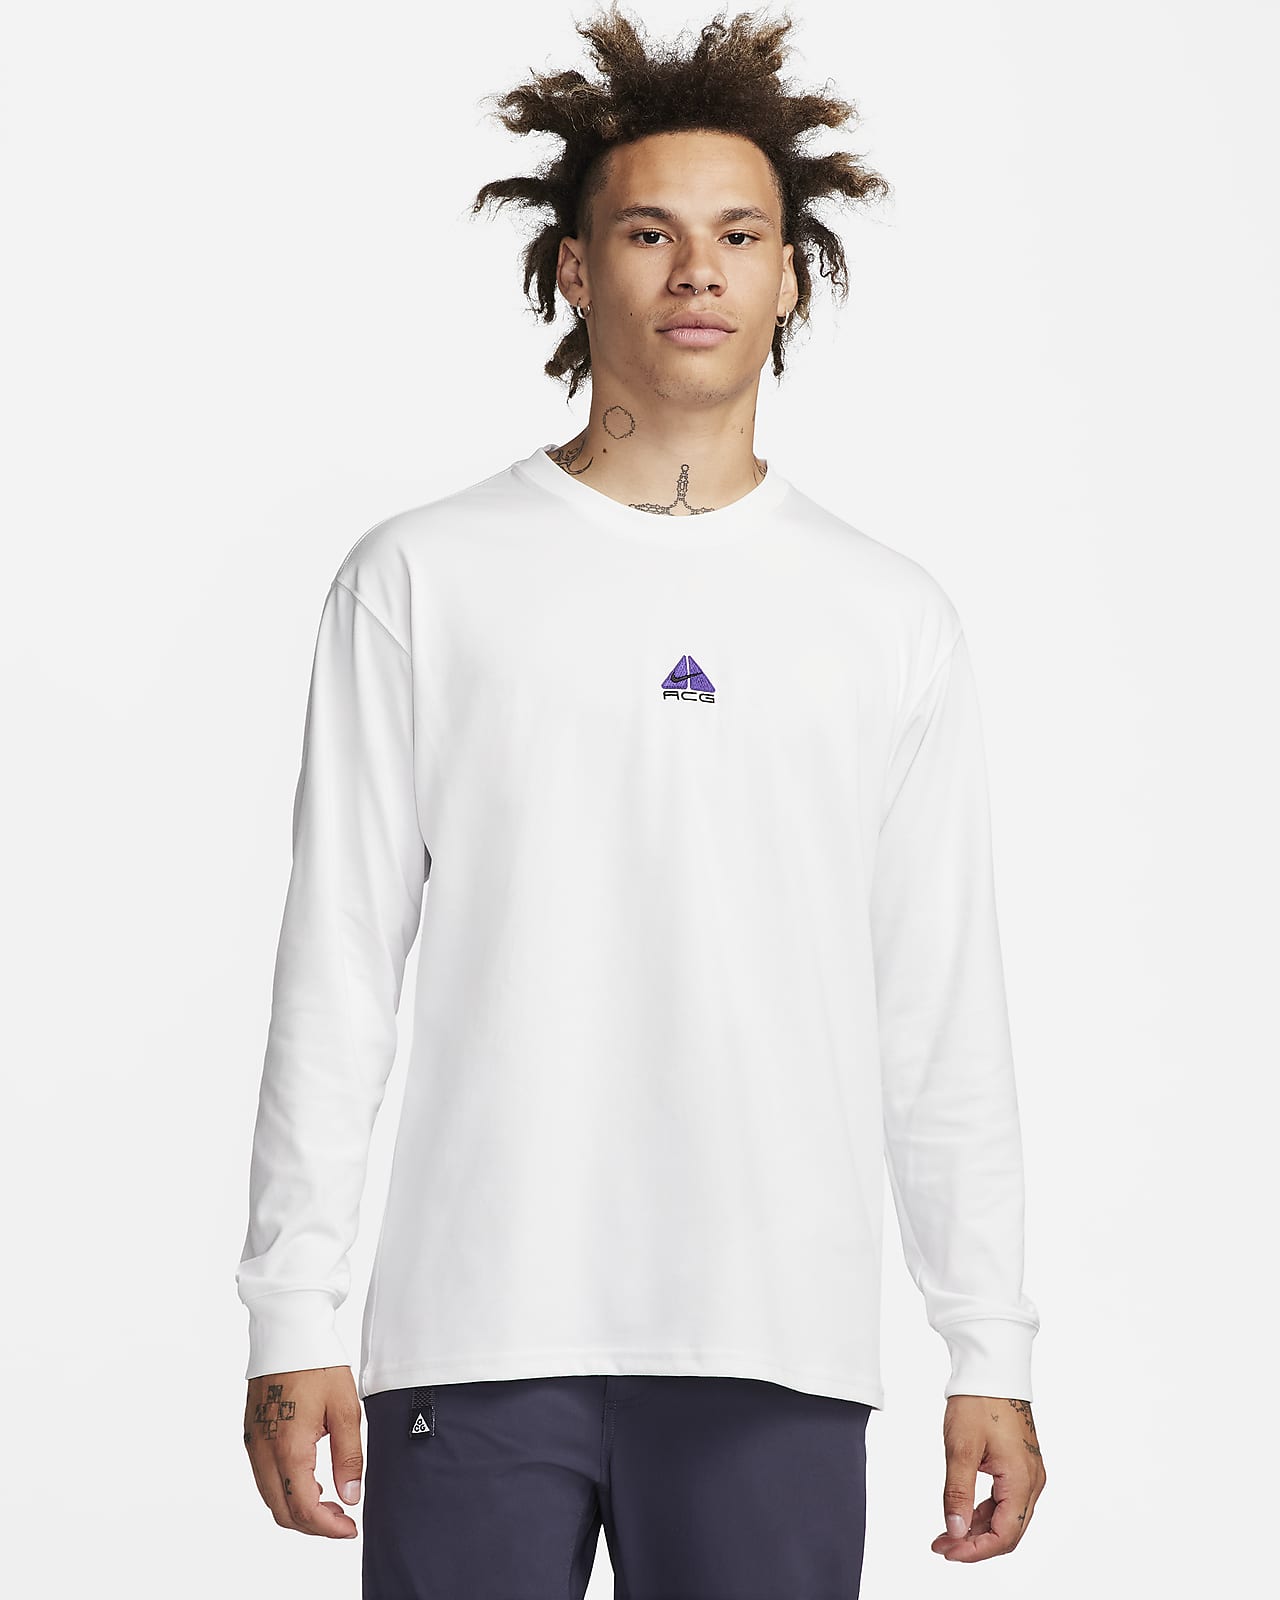 Tee-shirt à manches longues Nike ACG « Lungs » pour homme